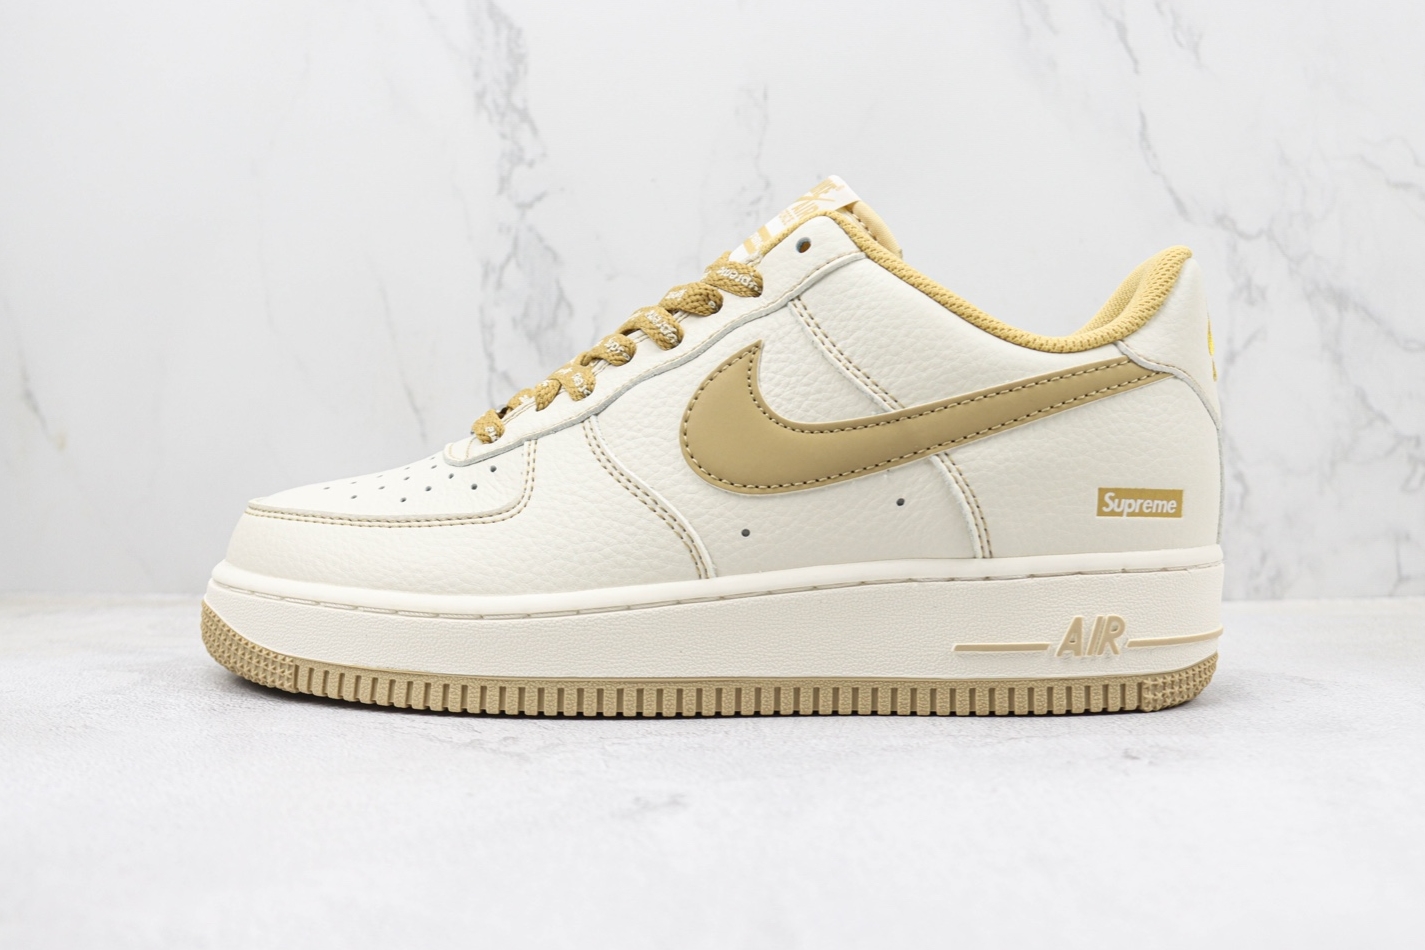 Supreme x Nike Air Force 1 07 Low Beige Khaki Gold SU0220-011 | Limited Edition Streetwear Sneakers